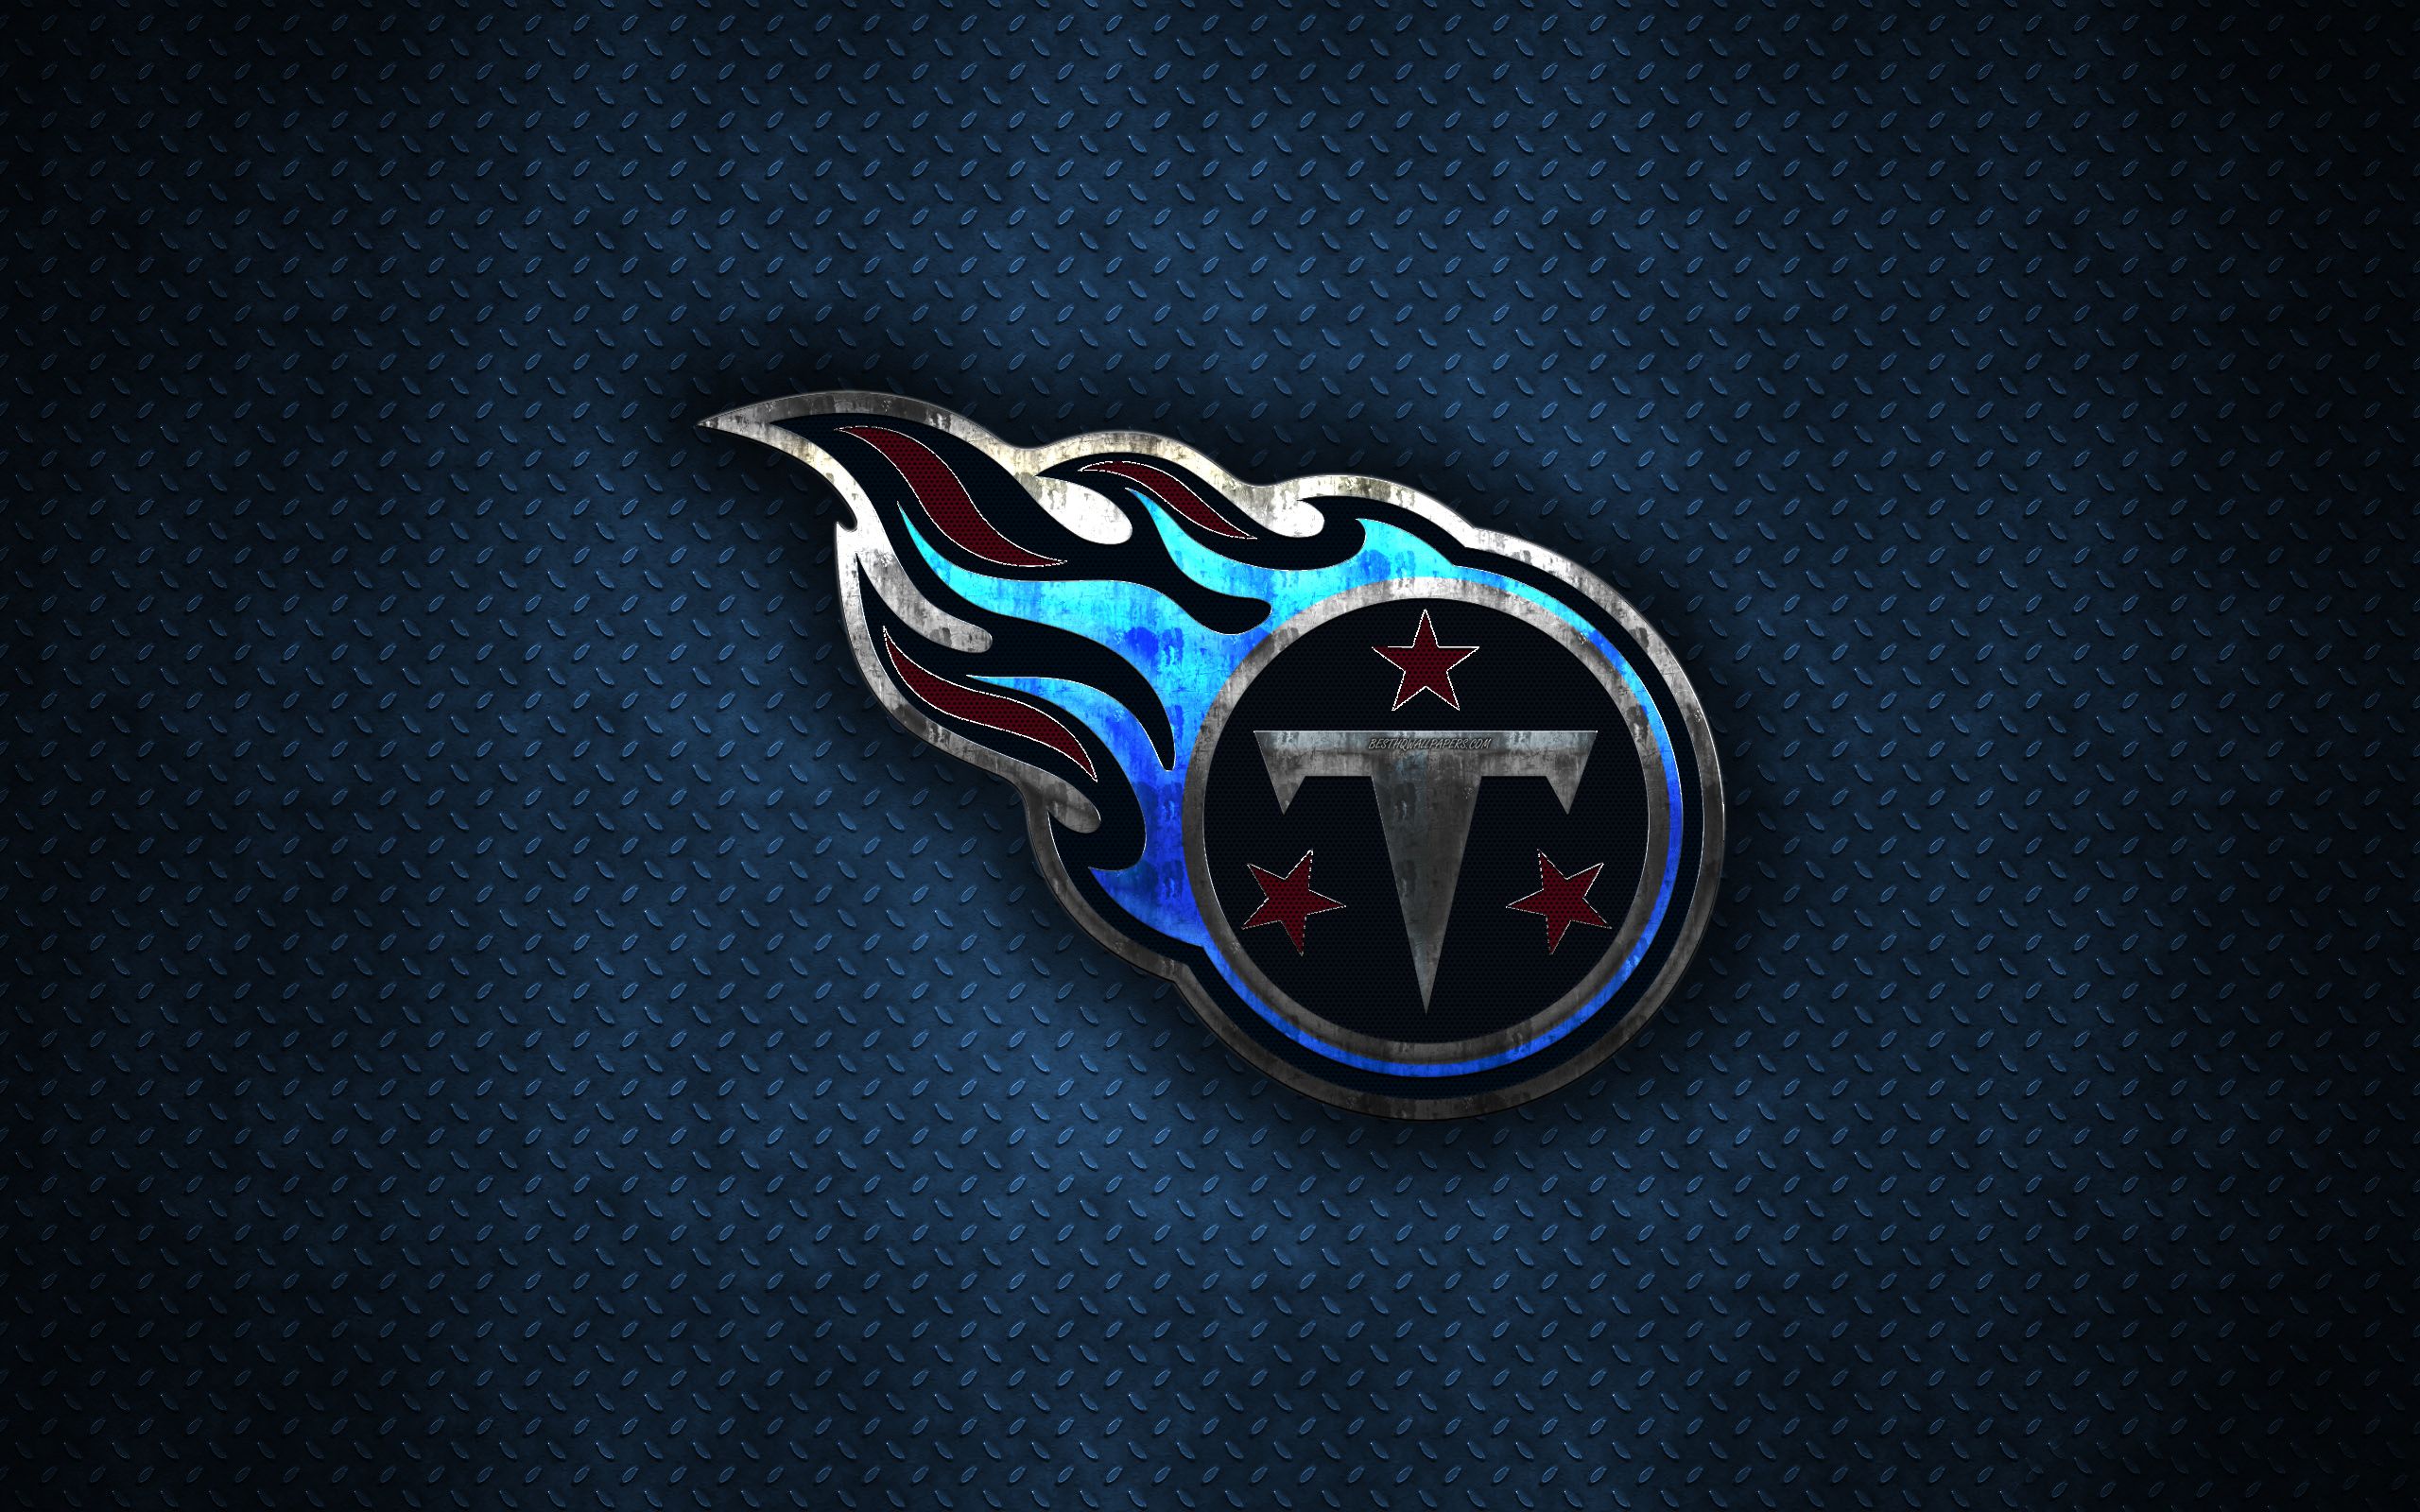 Download wallpaper Tennessee Titans, American football club, metal logo, Nashville, Tennessee, USA, creative art, NFL, emblem, blue metal background, american football club for desktop with resolution 2560x1600. High Quality HD picture wallpaper